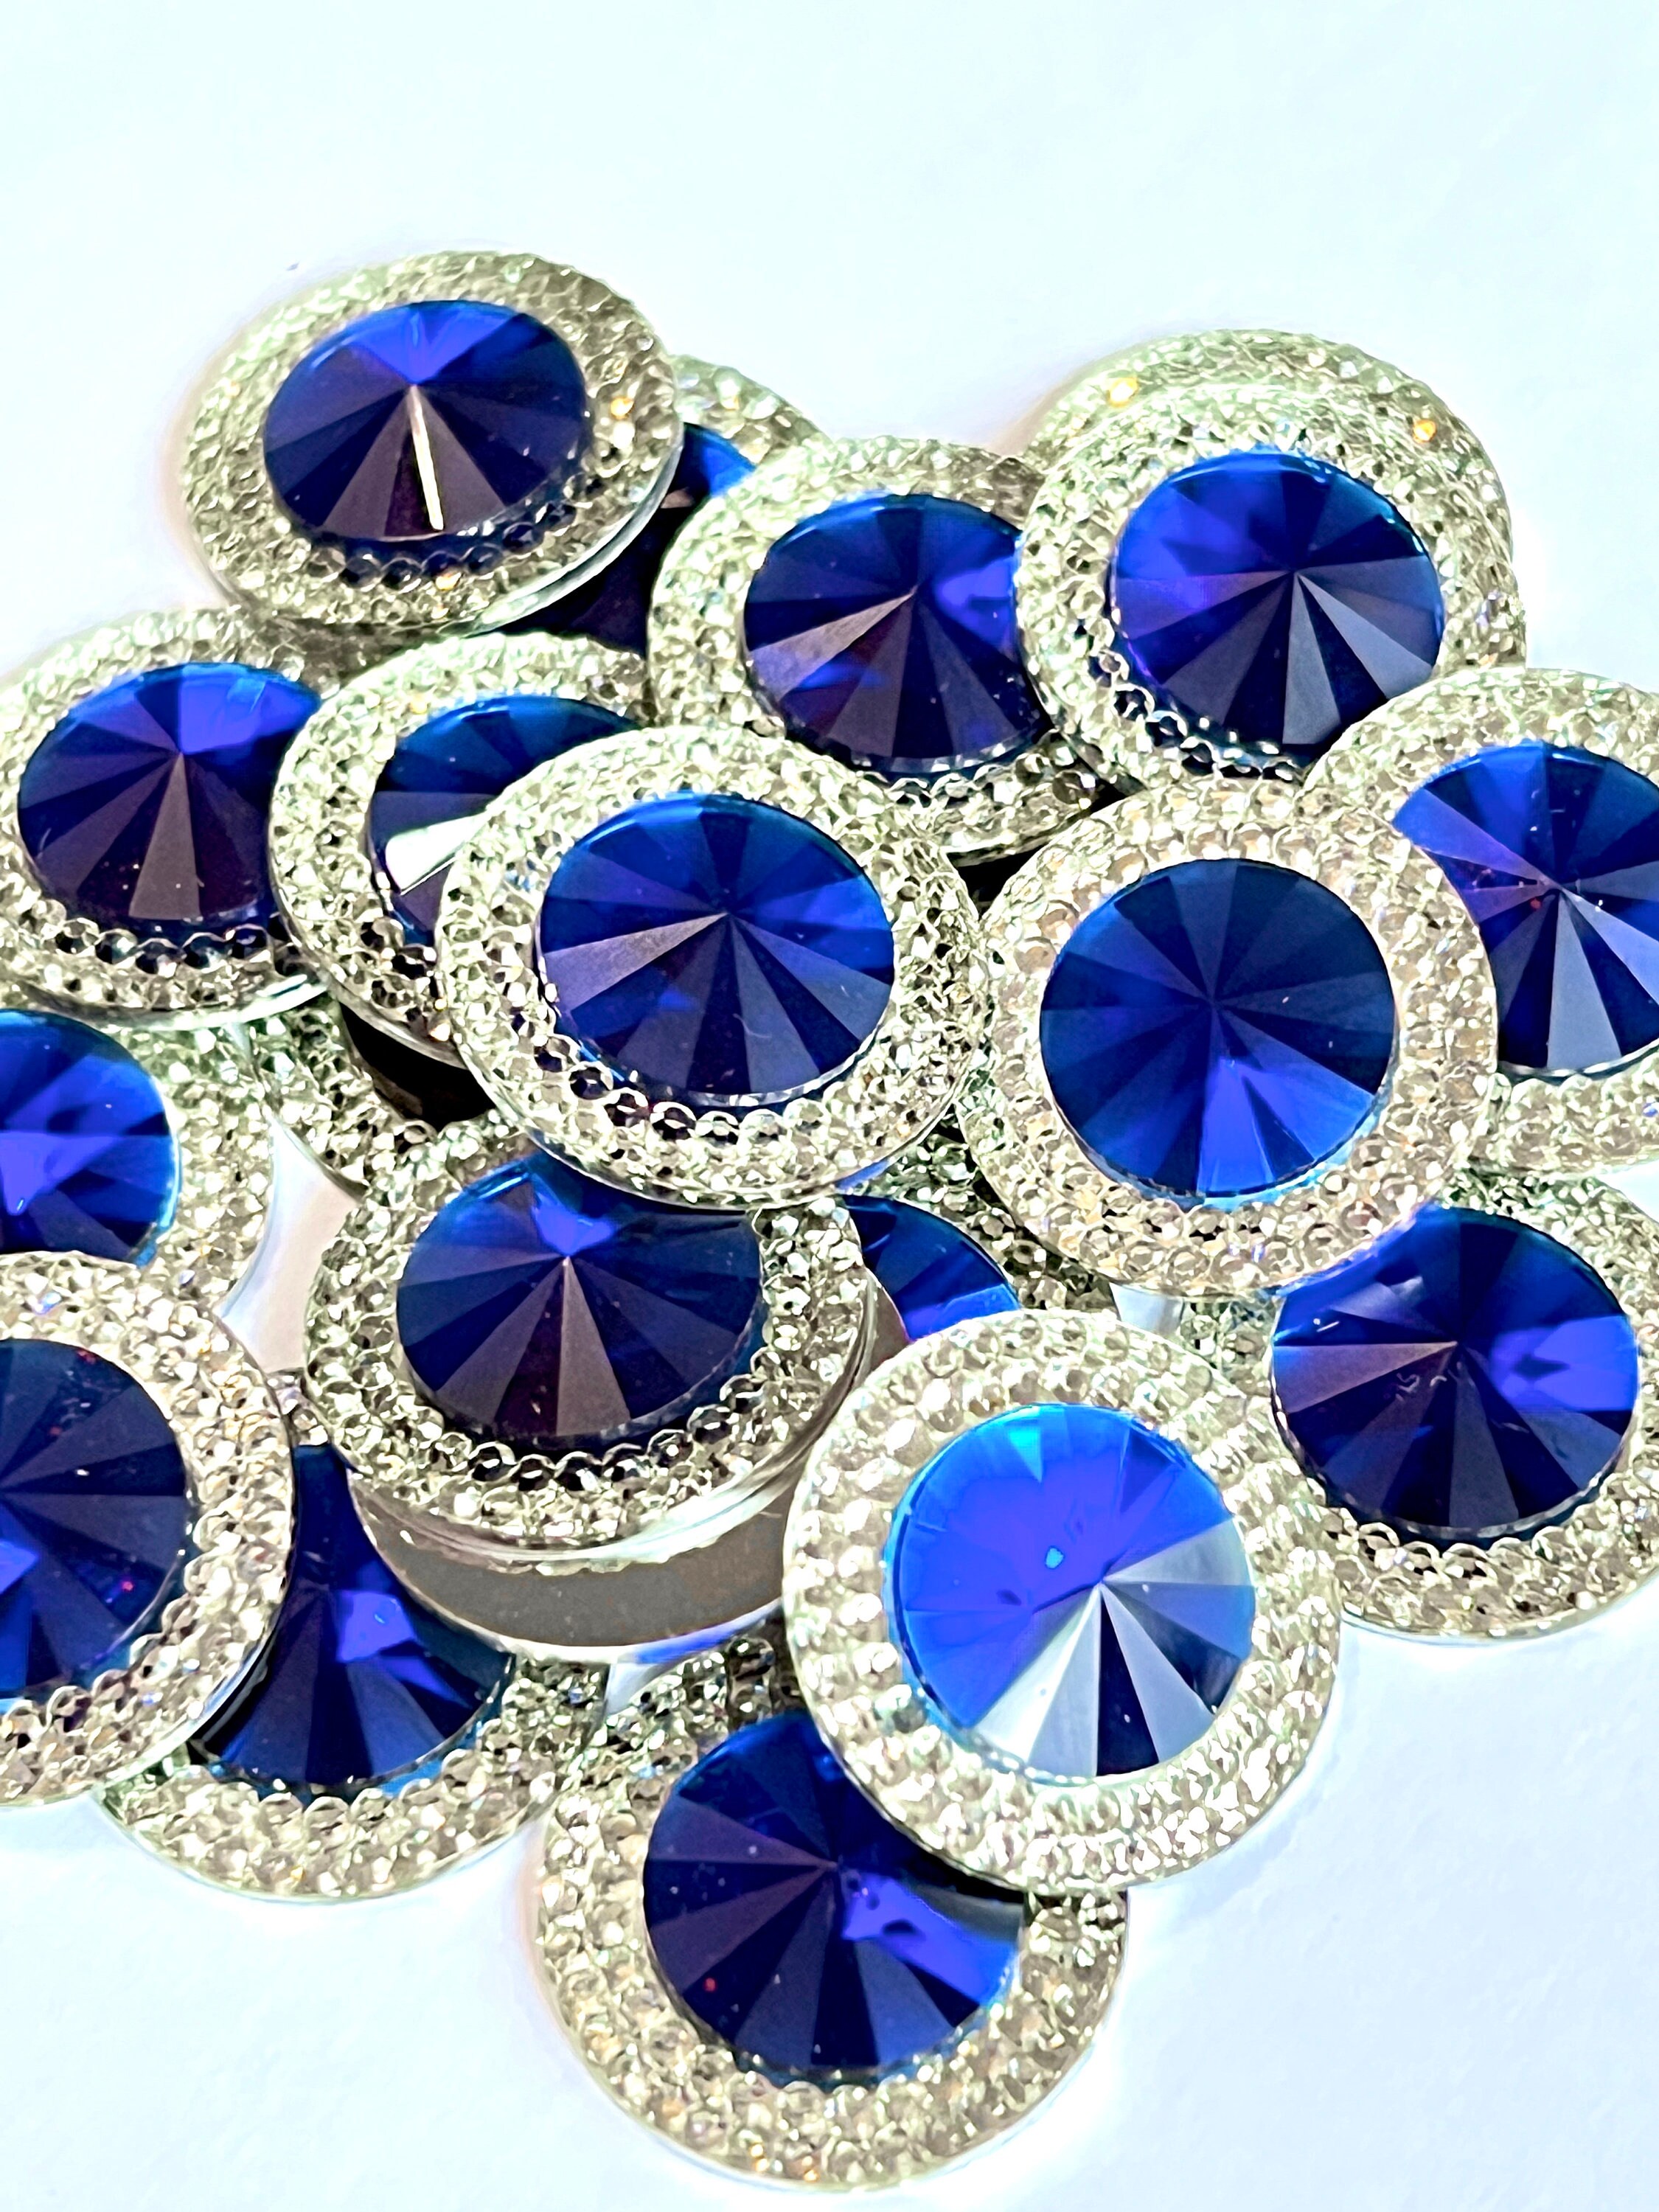  Flat Back Rhinestones Buttons Embellishments with Diamond, Sew  On Crystals Glass Rhinestone for Clothing Wedding Bouquet(20pcs) Royal Blue